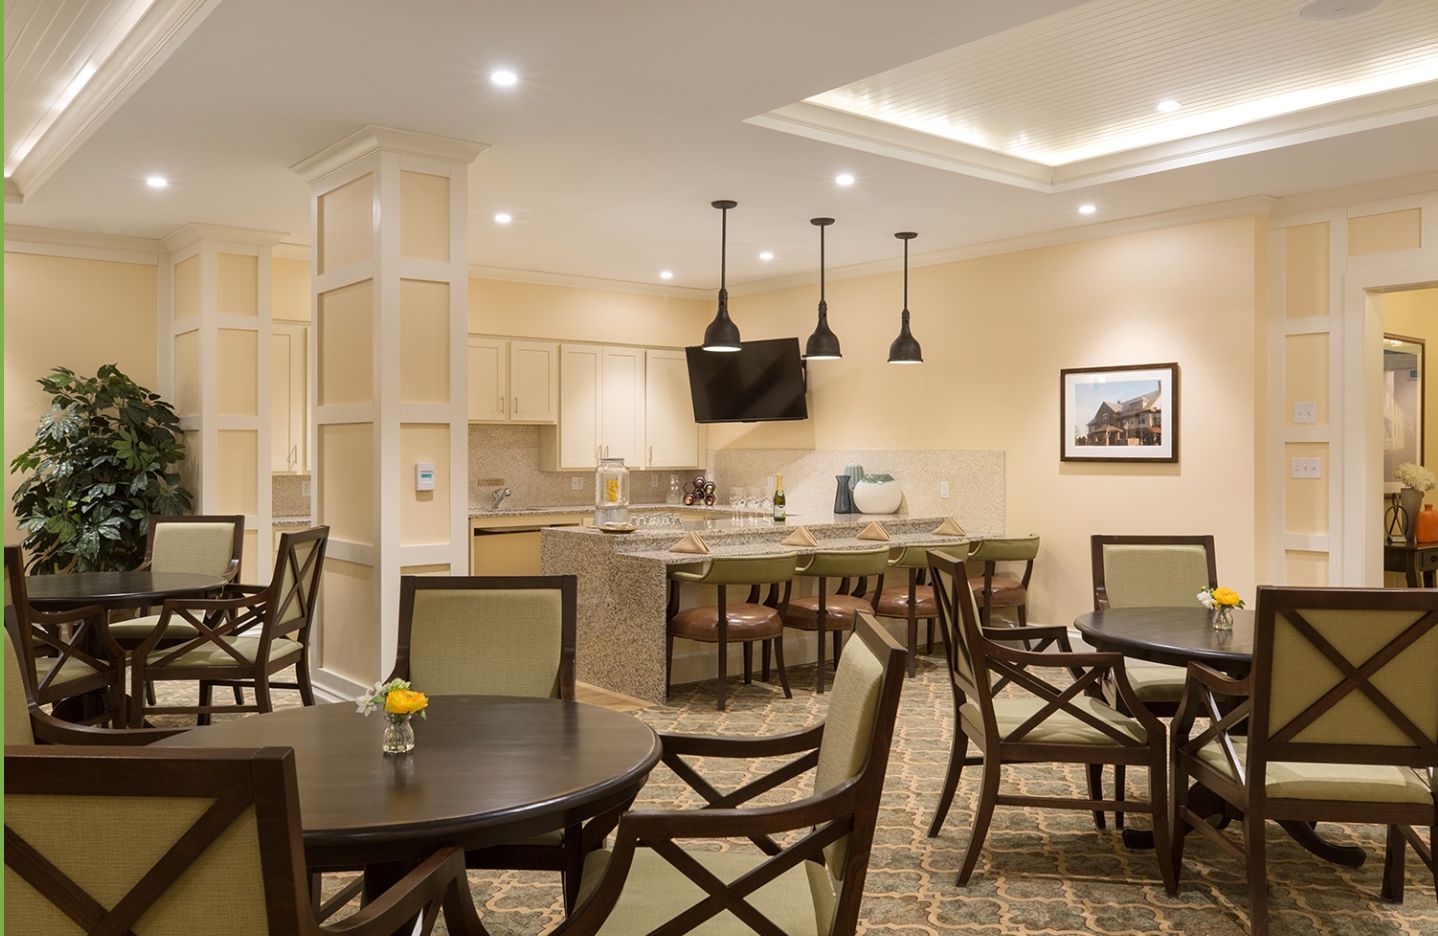 Senior living community, The Residence at Orchard Grove, featuring dining room, kitchen, and modern decor.